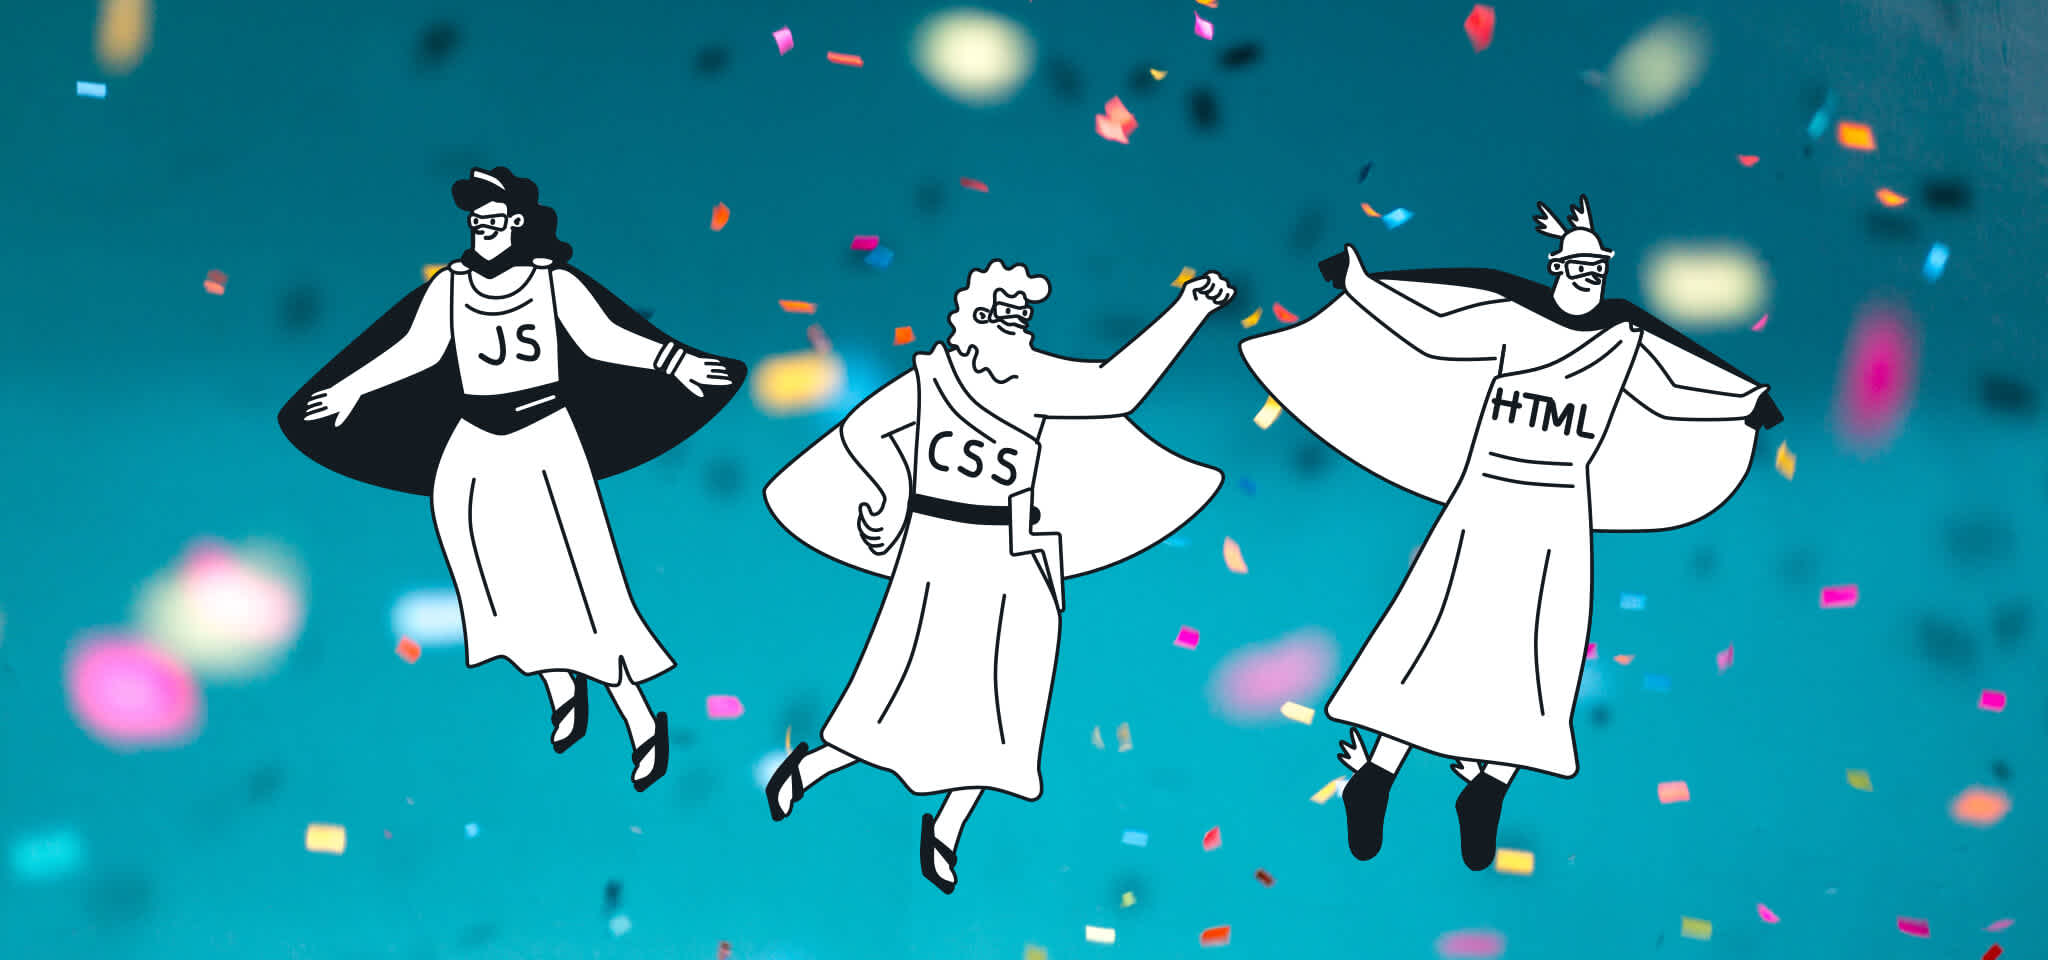 Three superhero Gods in front of a blue background with confetti